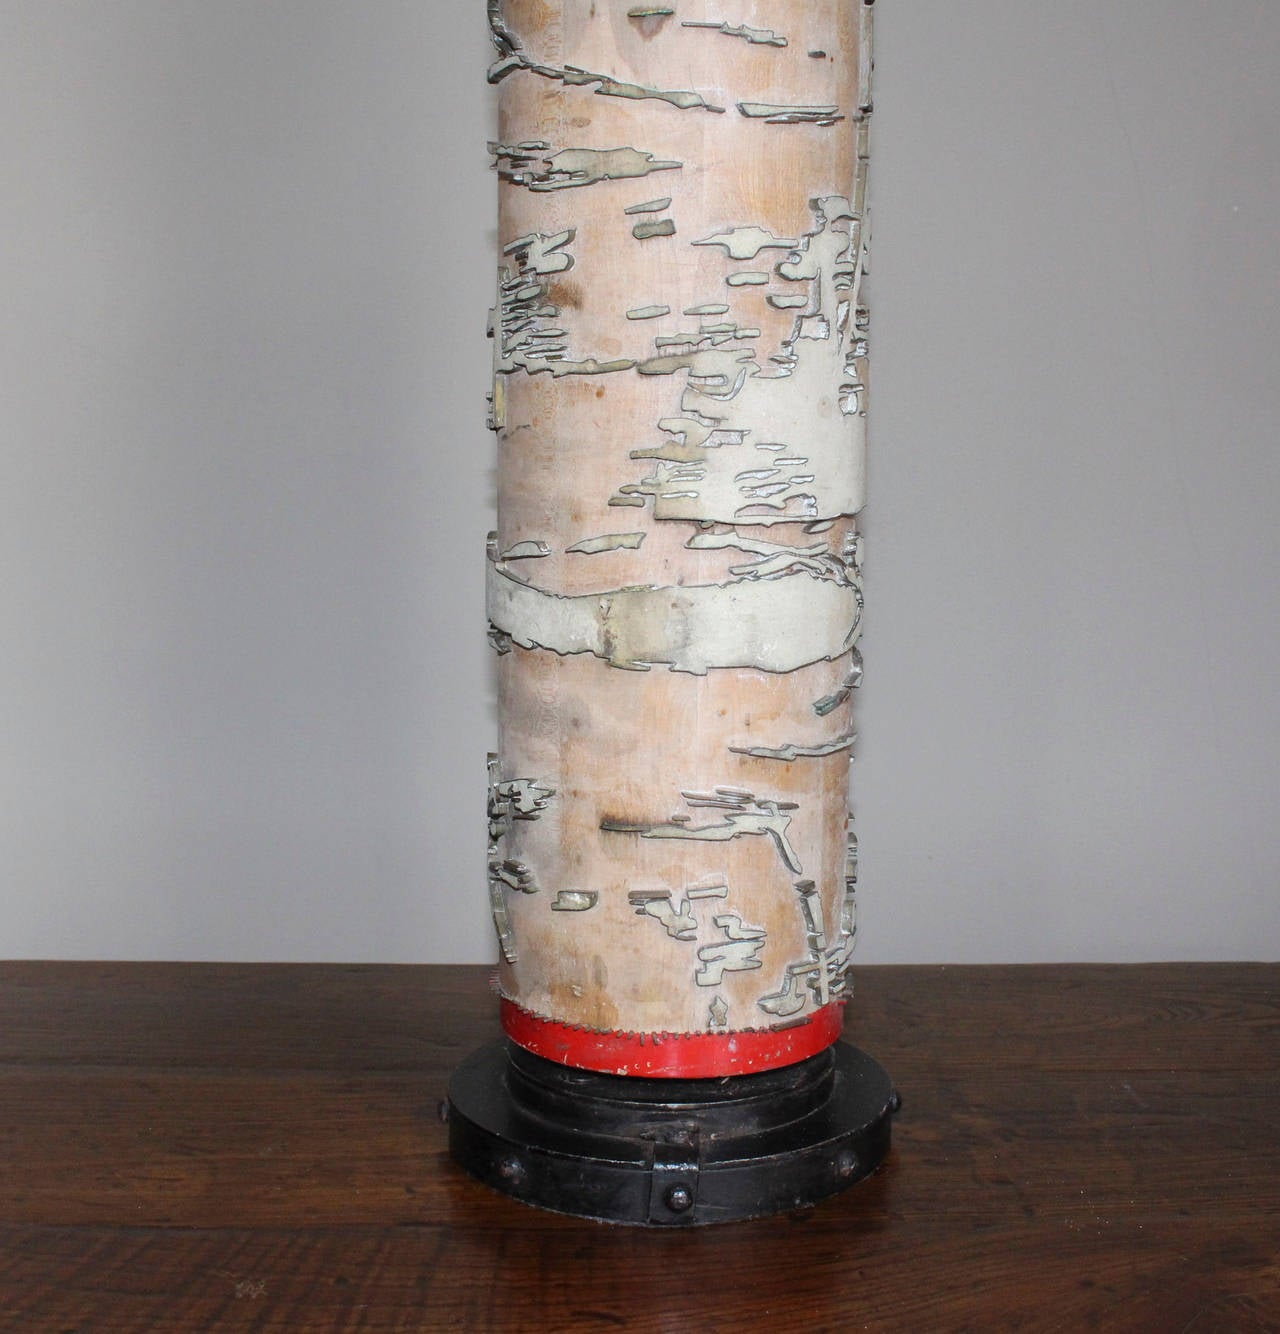 Vintage table lamp built from a repurposed wallpaper print roller bordered with red painted trim and standing on metal base detailed with rivets. Lamp measures 38